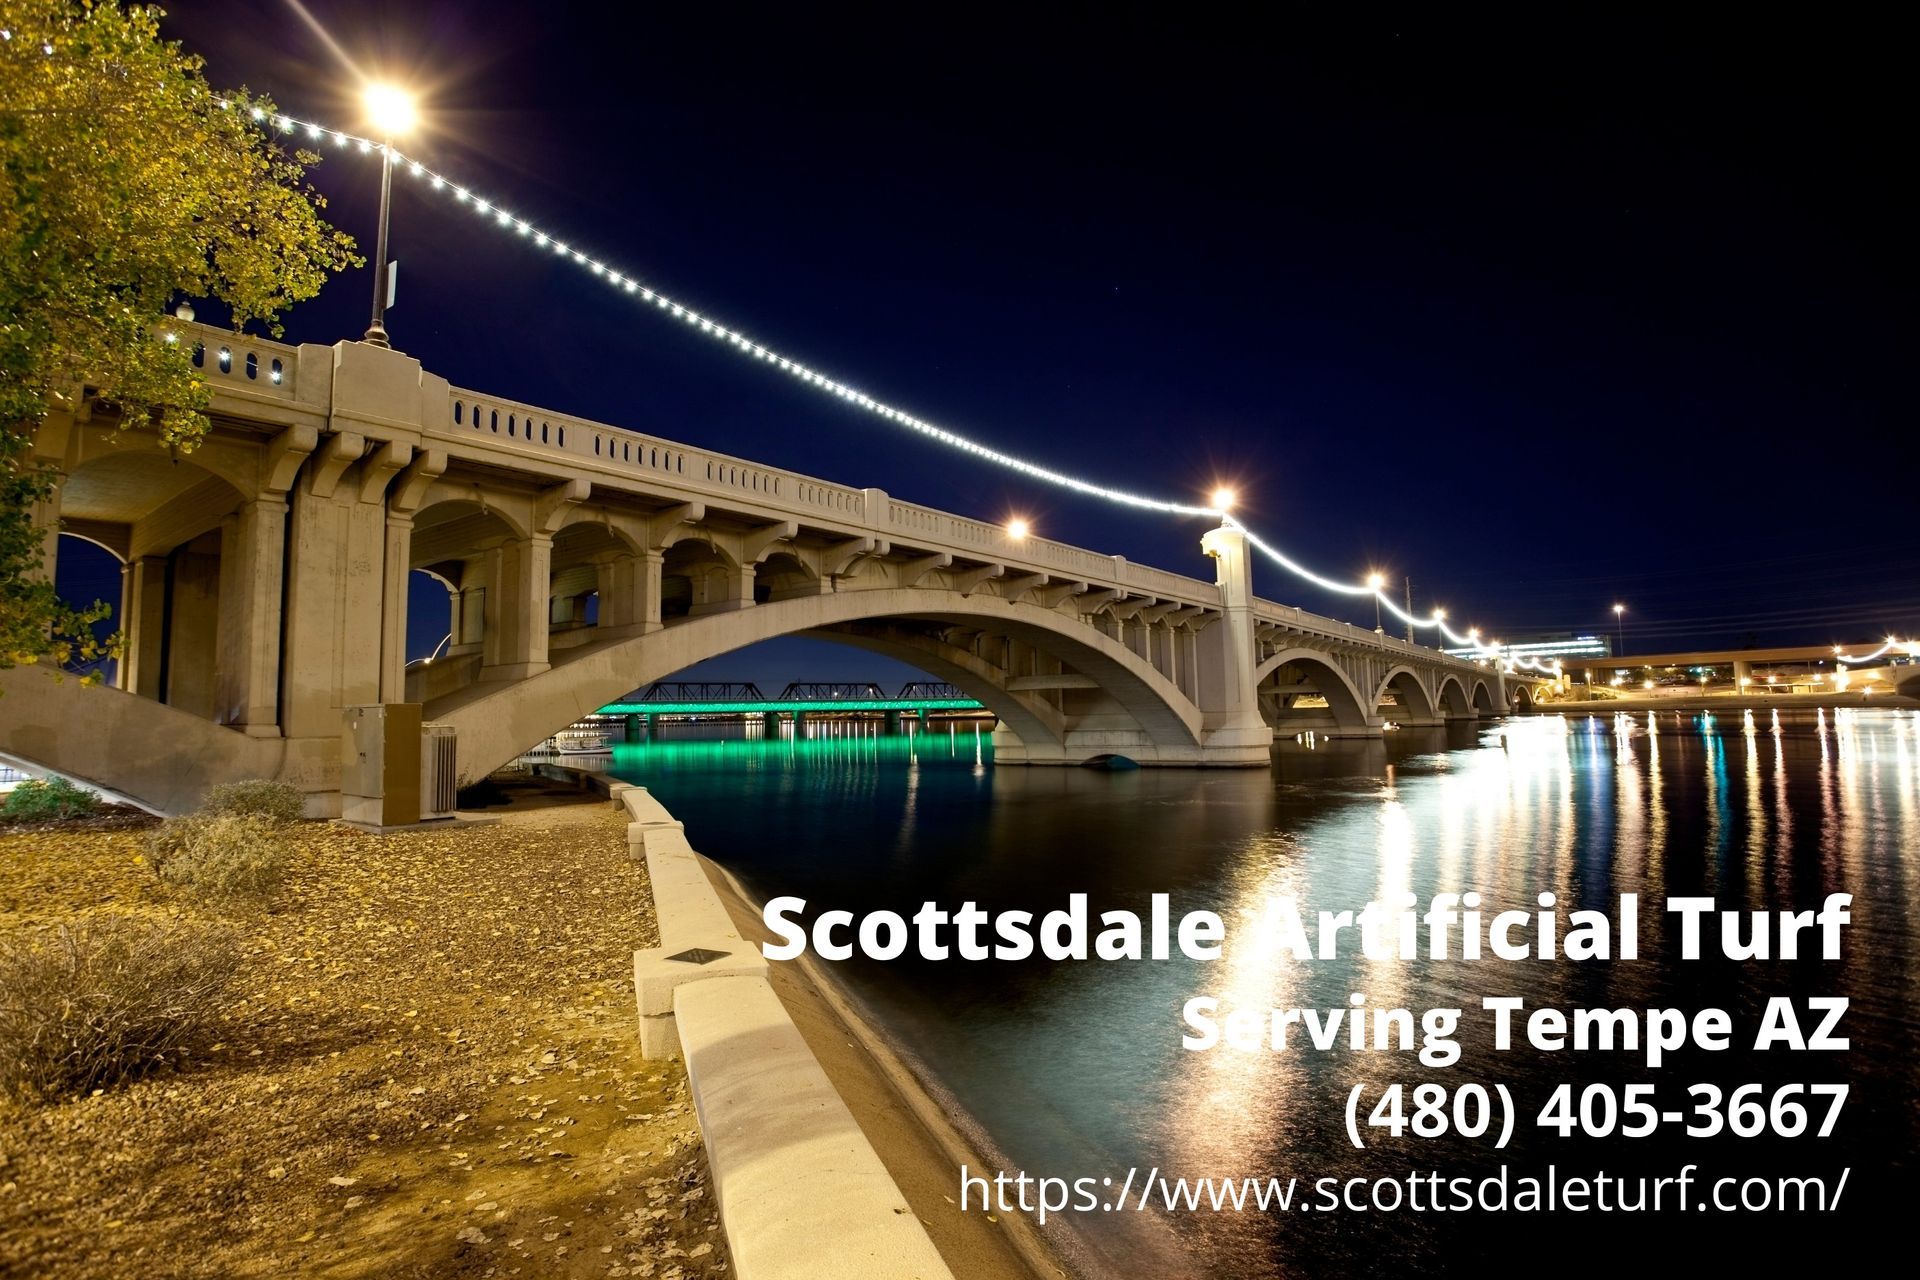 business info of Scottsdale Artificial Turf - a trusted artificial turf installer in Tempe, AZ